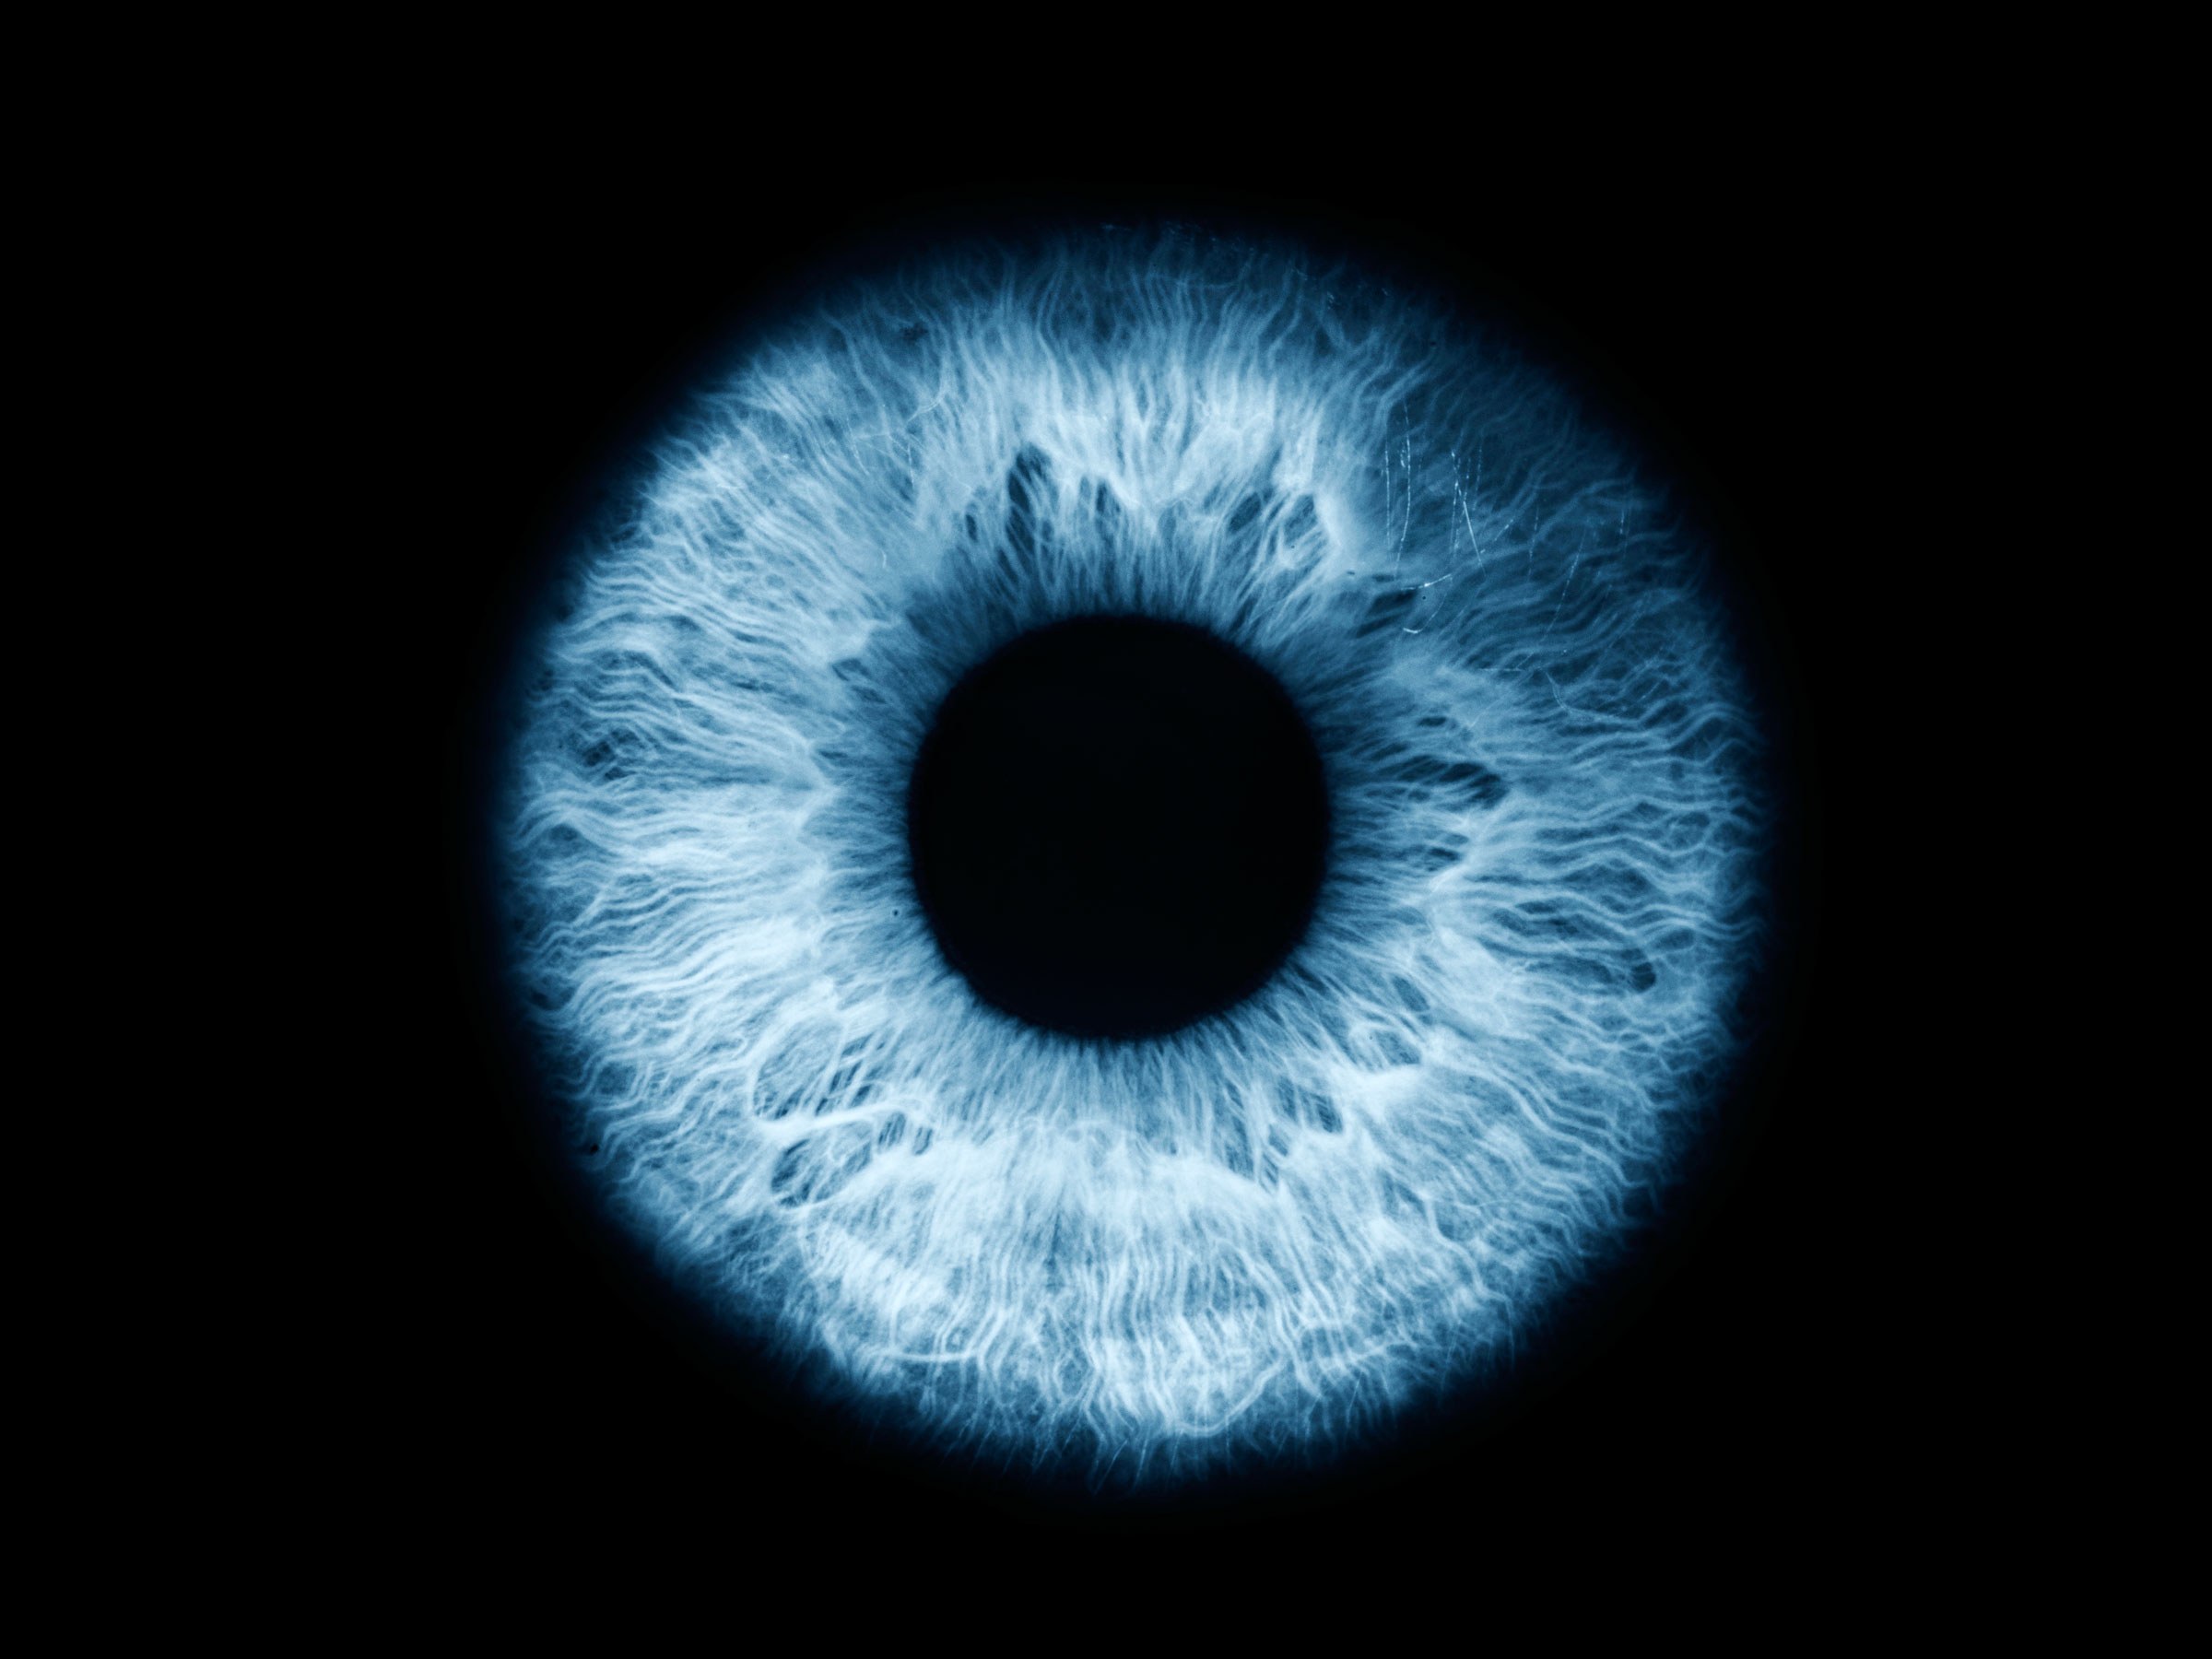 Iris Scans Come to Nursing Homes. Next Stop, Your Phone | WIRED